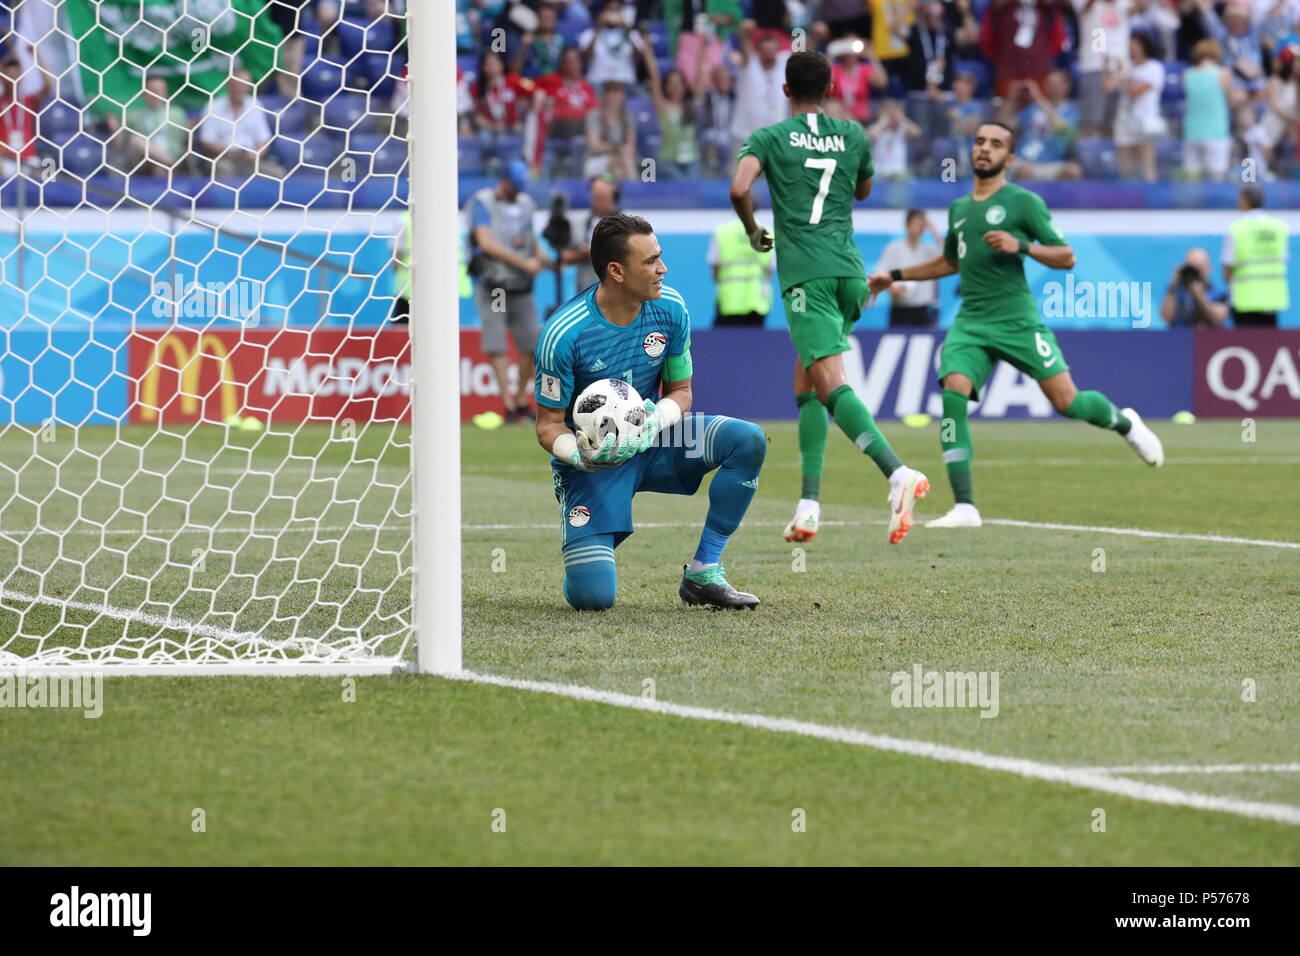 Volgograd, Russia. 25th June, 2018. Egypt goalkeeper Essam El-Hadary reacts after conceding a goal from a penalty kick during the FIFA World Cup 2018 Group A soccer match between Saudi Arabia and Egypt at the Volgograd Arena in Volgograd, Russia, 25 June 2018. Credit: Ahmed Ramadan/dpa/Alamy Live News Stock Photo